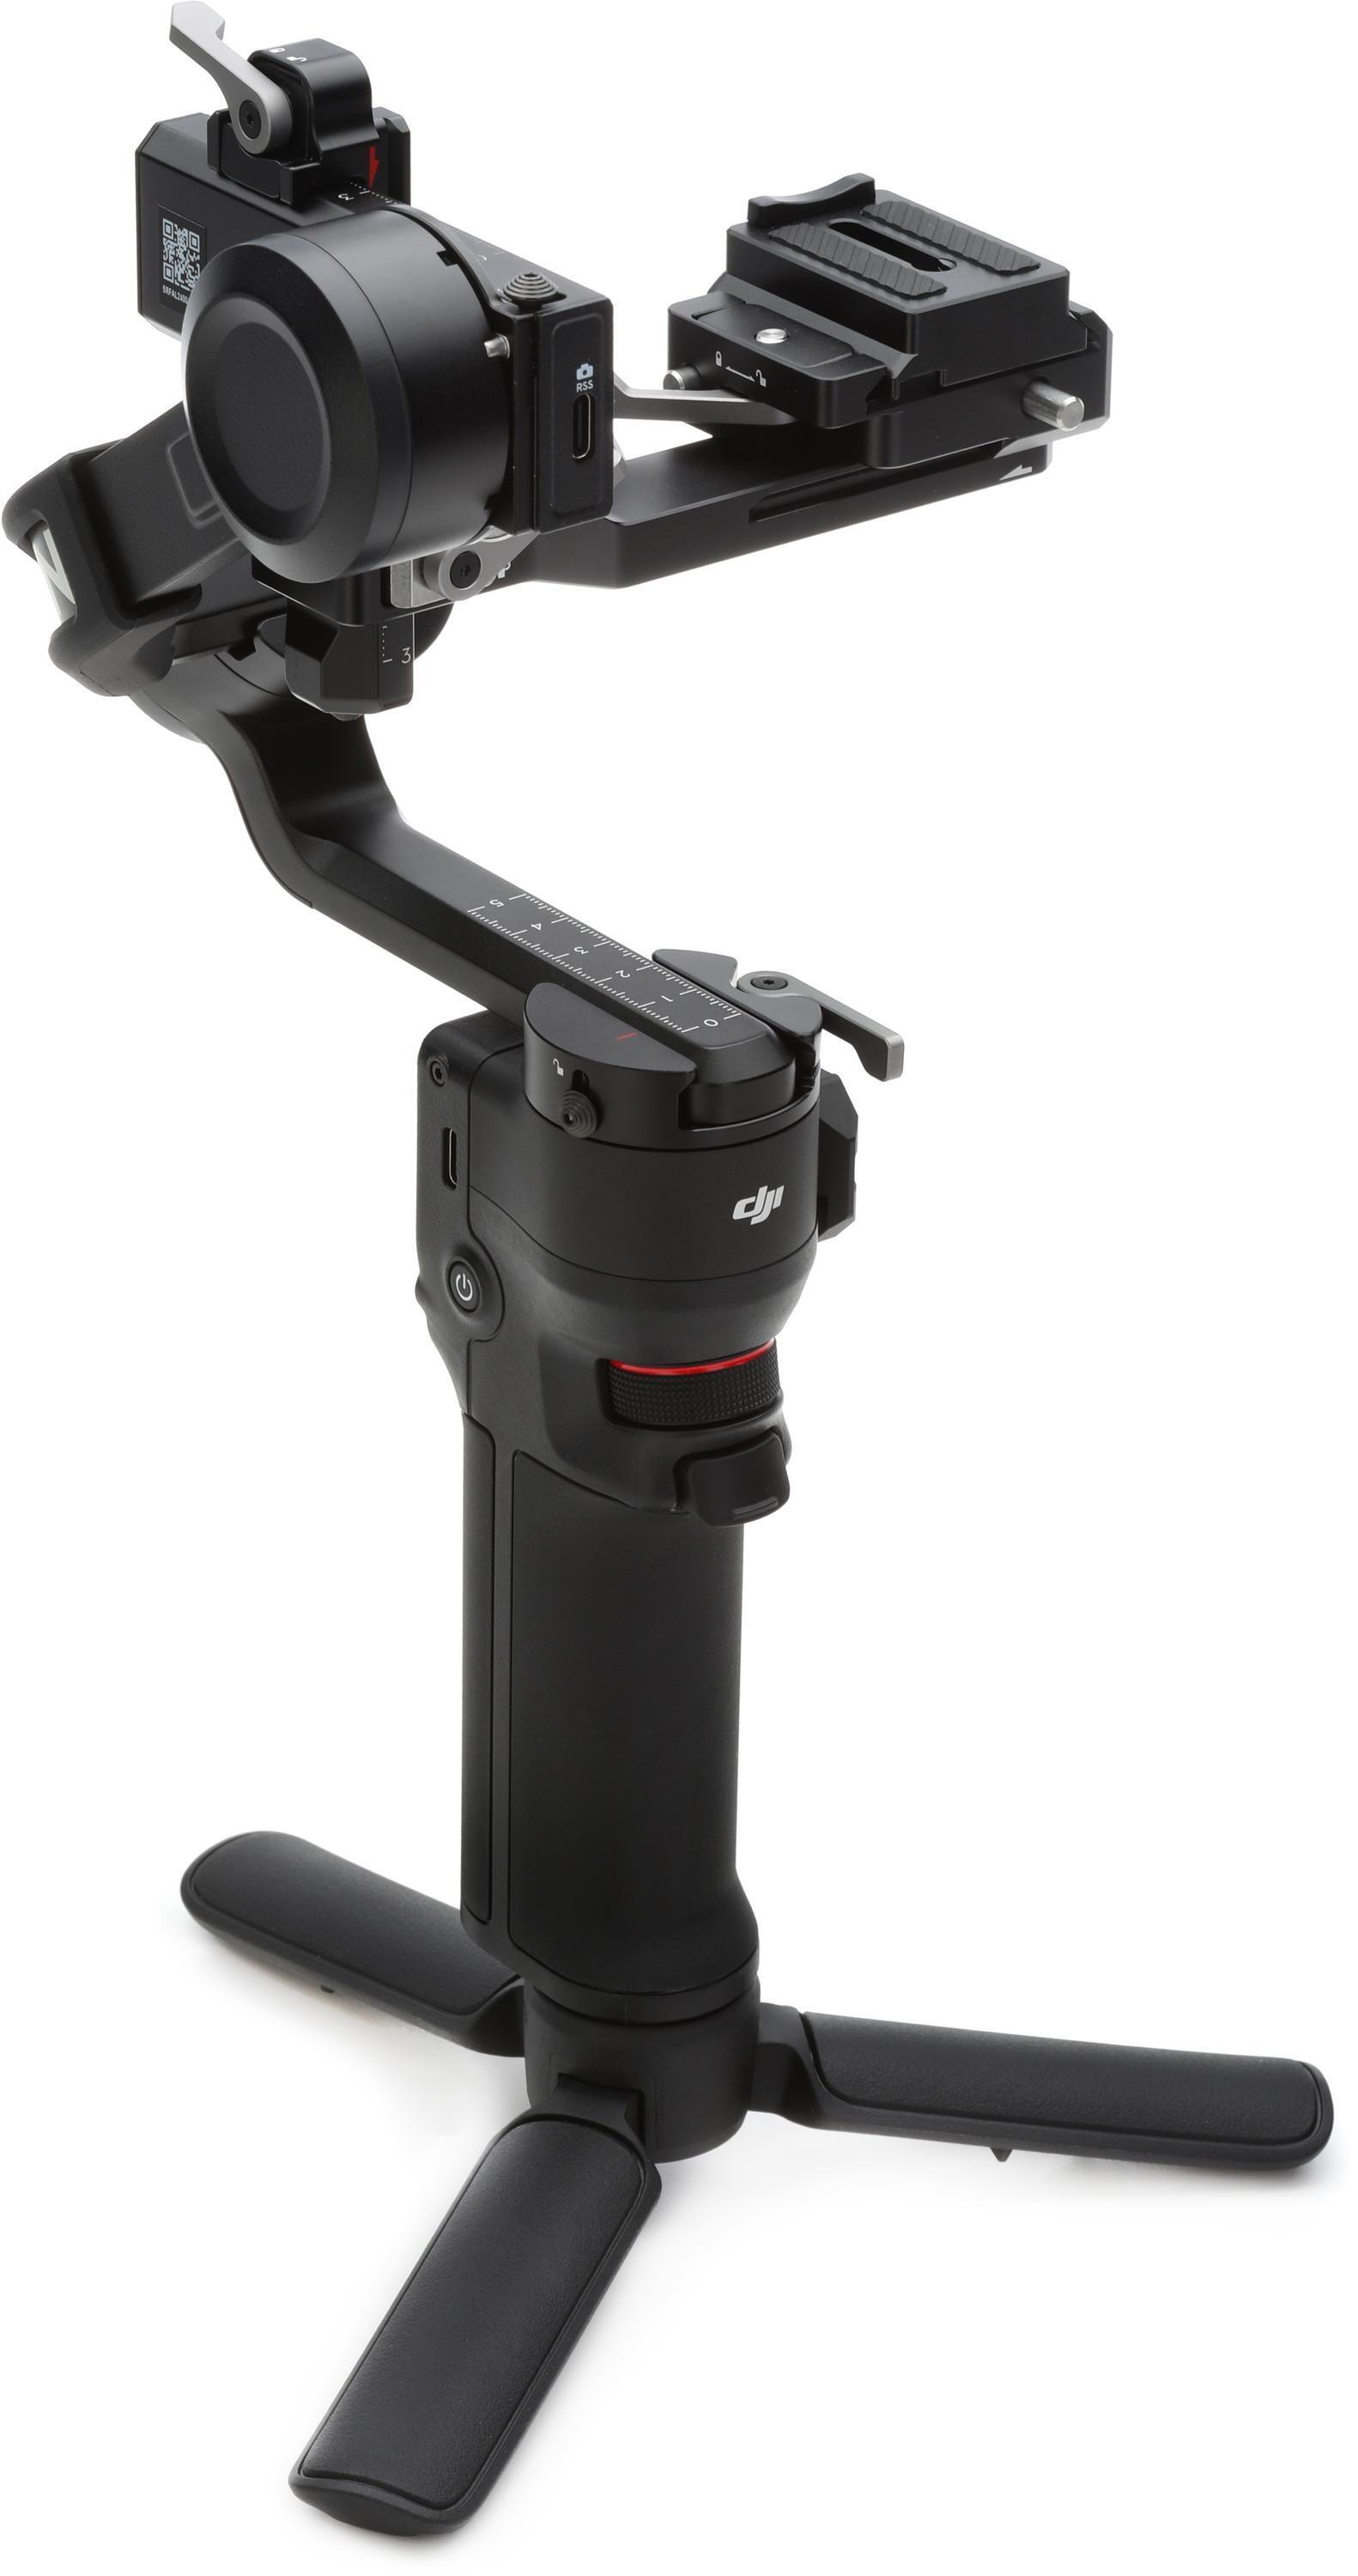 DJI RS 3 MINI - Gimbal Stabilizer for DSLR and Mirrorless Camera